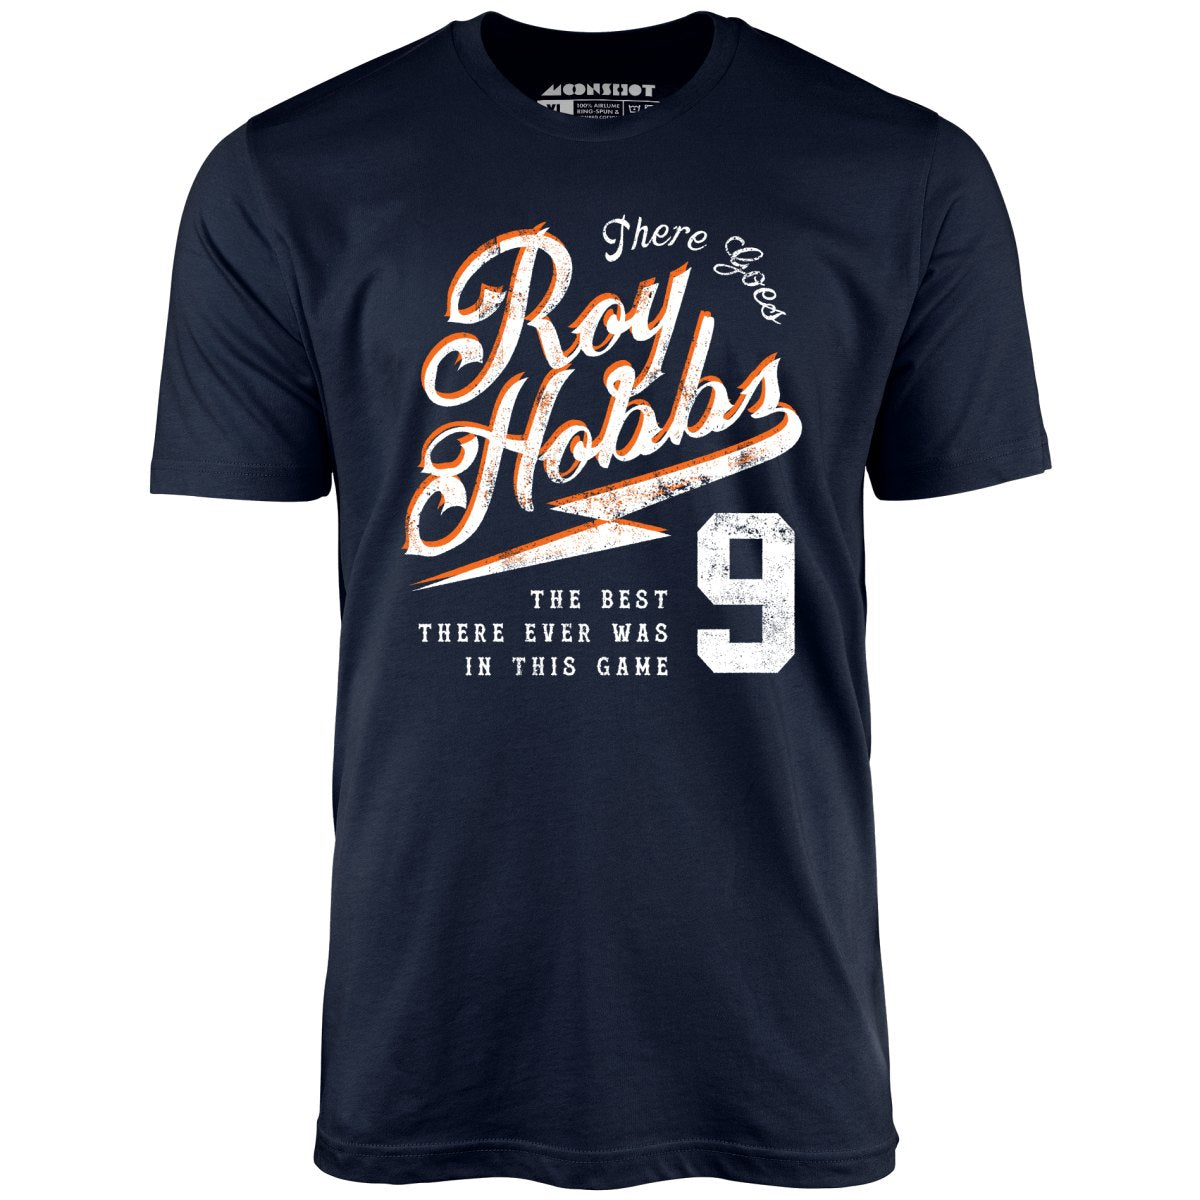 There Goes Roy Hobbs - Unisex T-Shirt